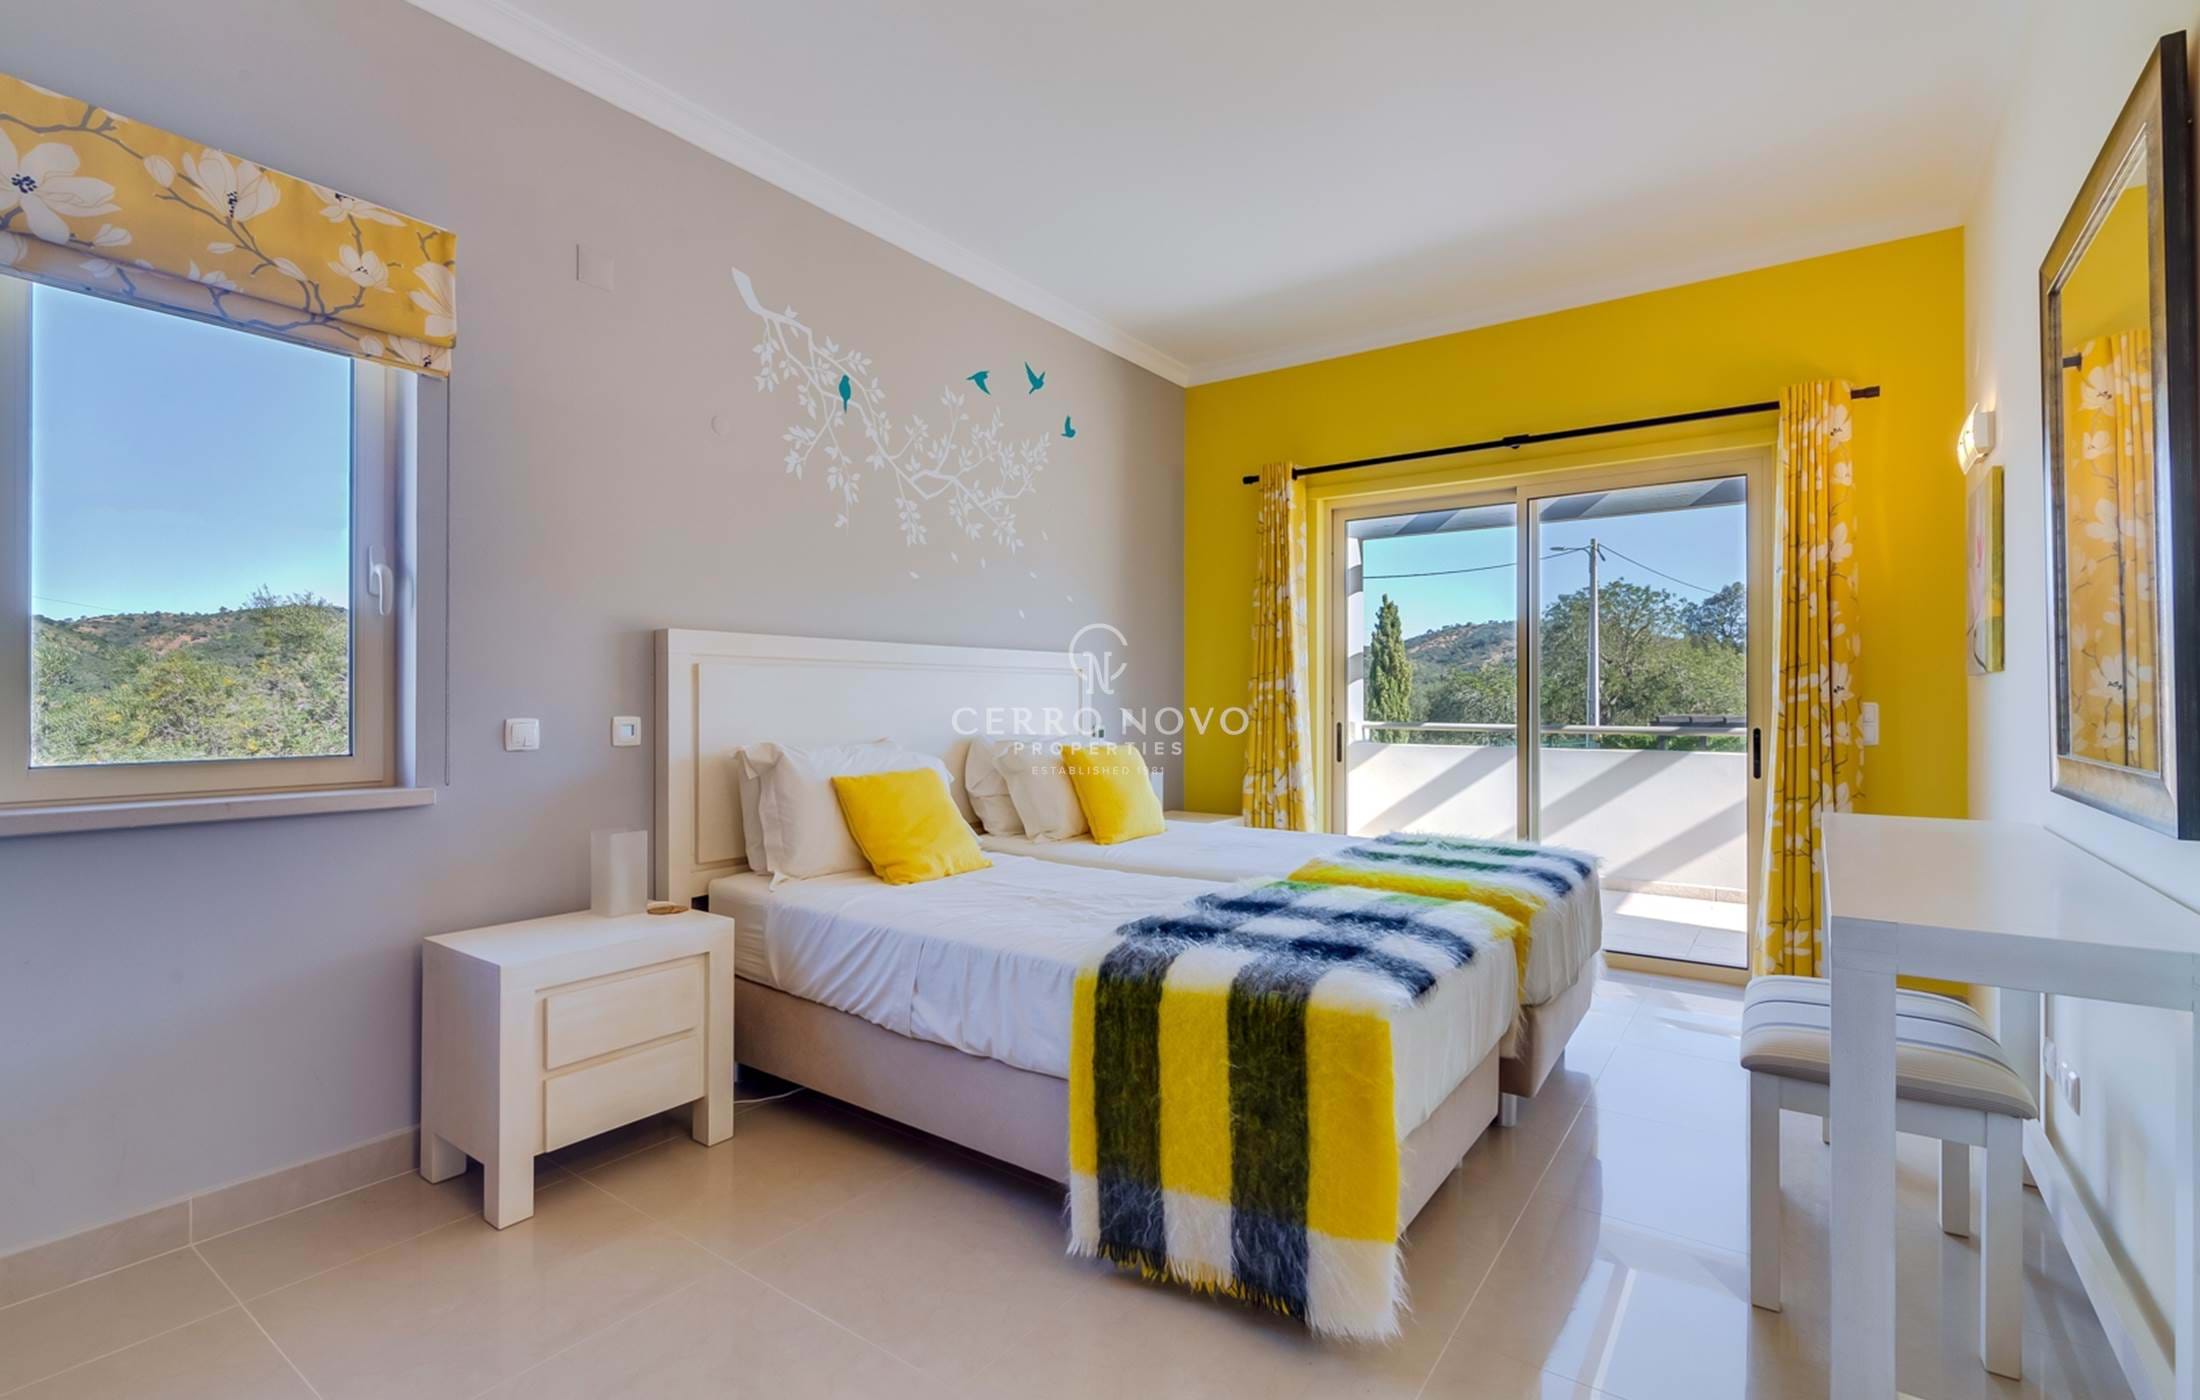 A luxury villa nestled in the countryside of Alte a charming and typically Algarvian village